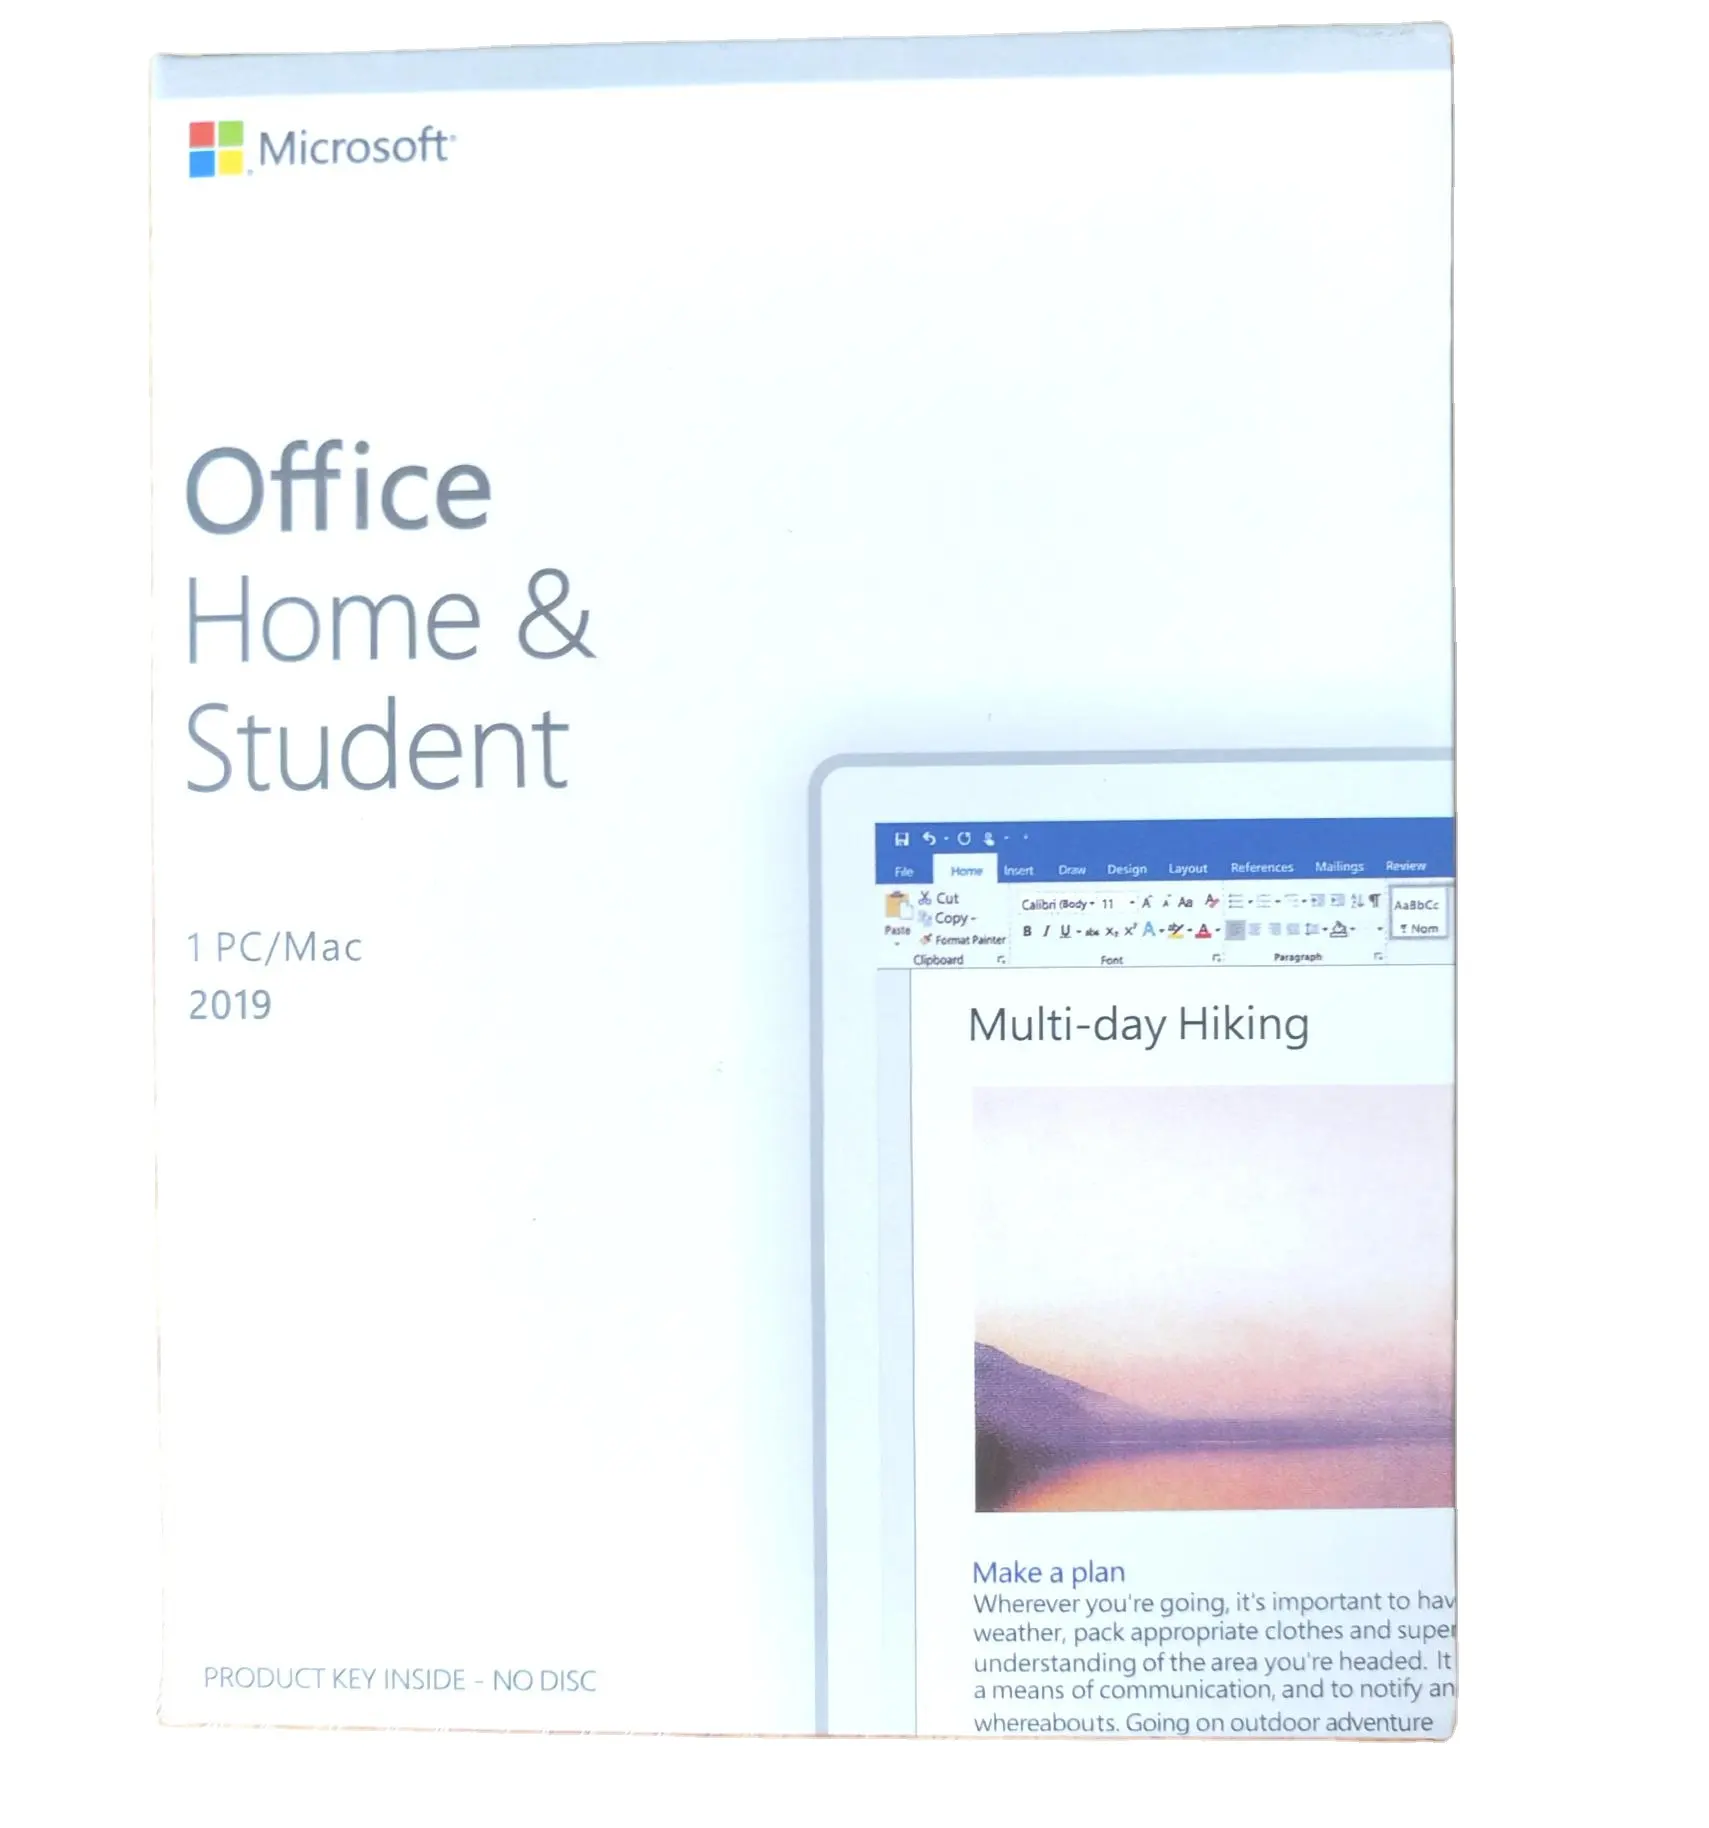 Authentic Office 2019 Home Student 1PC Mac Professional Retail OEM Key  100% Activation